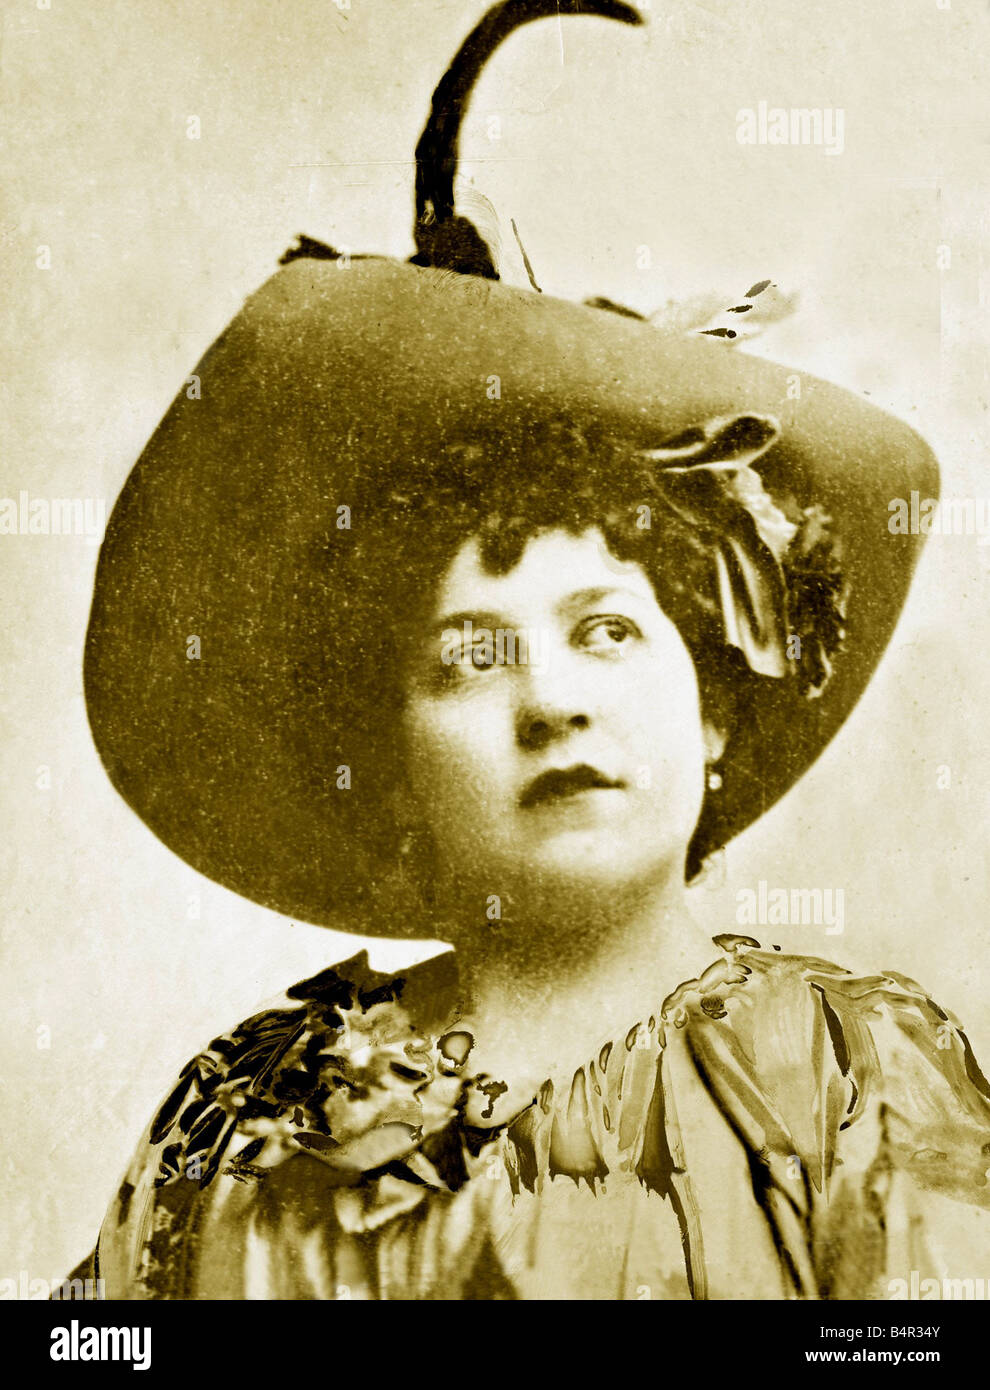 A photograph pf the late Mrs Crippen as she appeared on stage she was professionally known as Belle Elmore Dr Hawley Crippen during their trial for murder Dr Crippen was hanged in Pentonville Prison London after being convicted of murdering his wife Mrs Crippen as she appeared on stage she was professionally known as Belle Elmore in 1910 After killing her and hiding her remains in the cellar of his London home the American born doctor tried to escape to Canada with his lover Ethel Le Neve who was dressed as a boy But Crippen was caught after Henry Kendall the sharp eyed captain of the SS Stock Photo